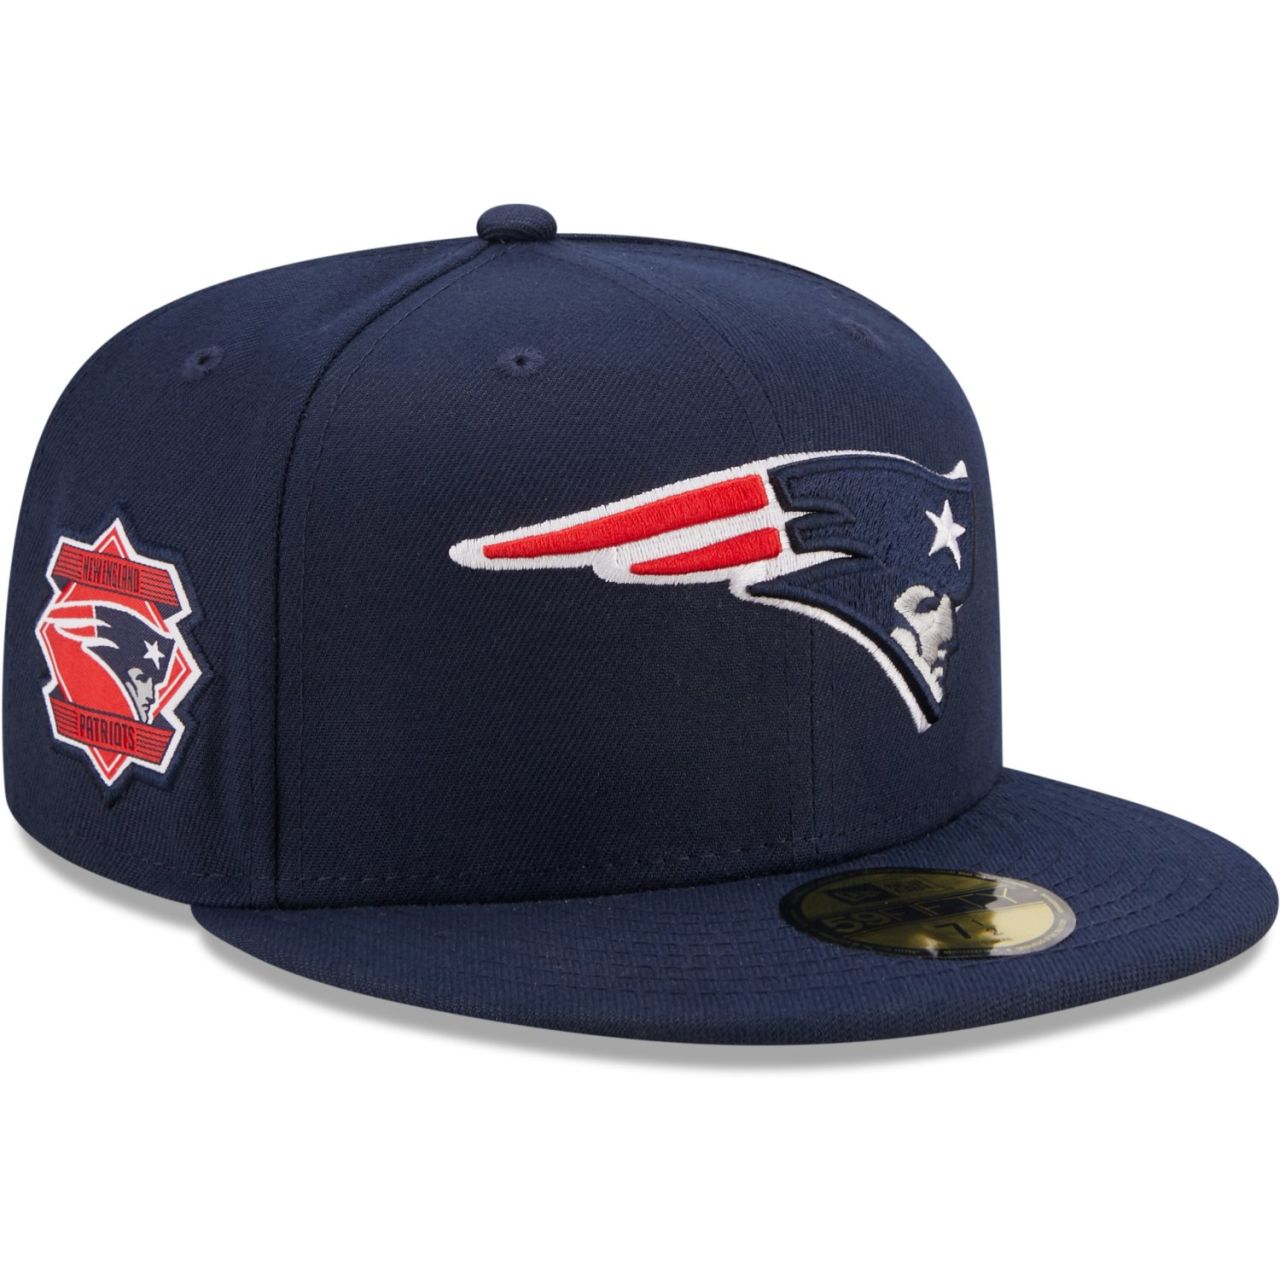 New Era 59Fifty Fitted Cap - SIDE PATCH New England Patriots von New Era